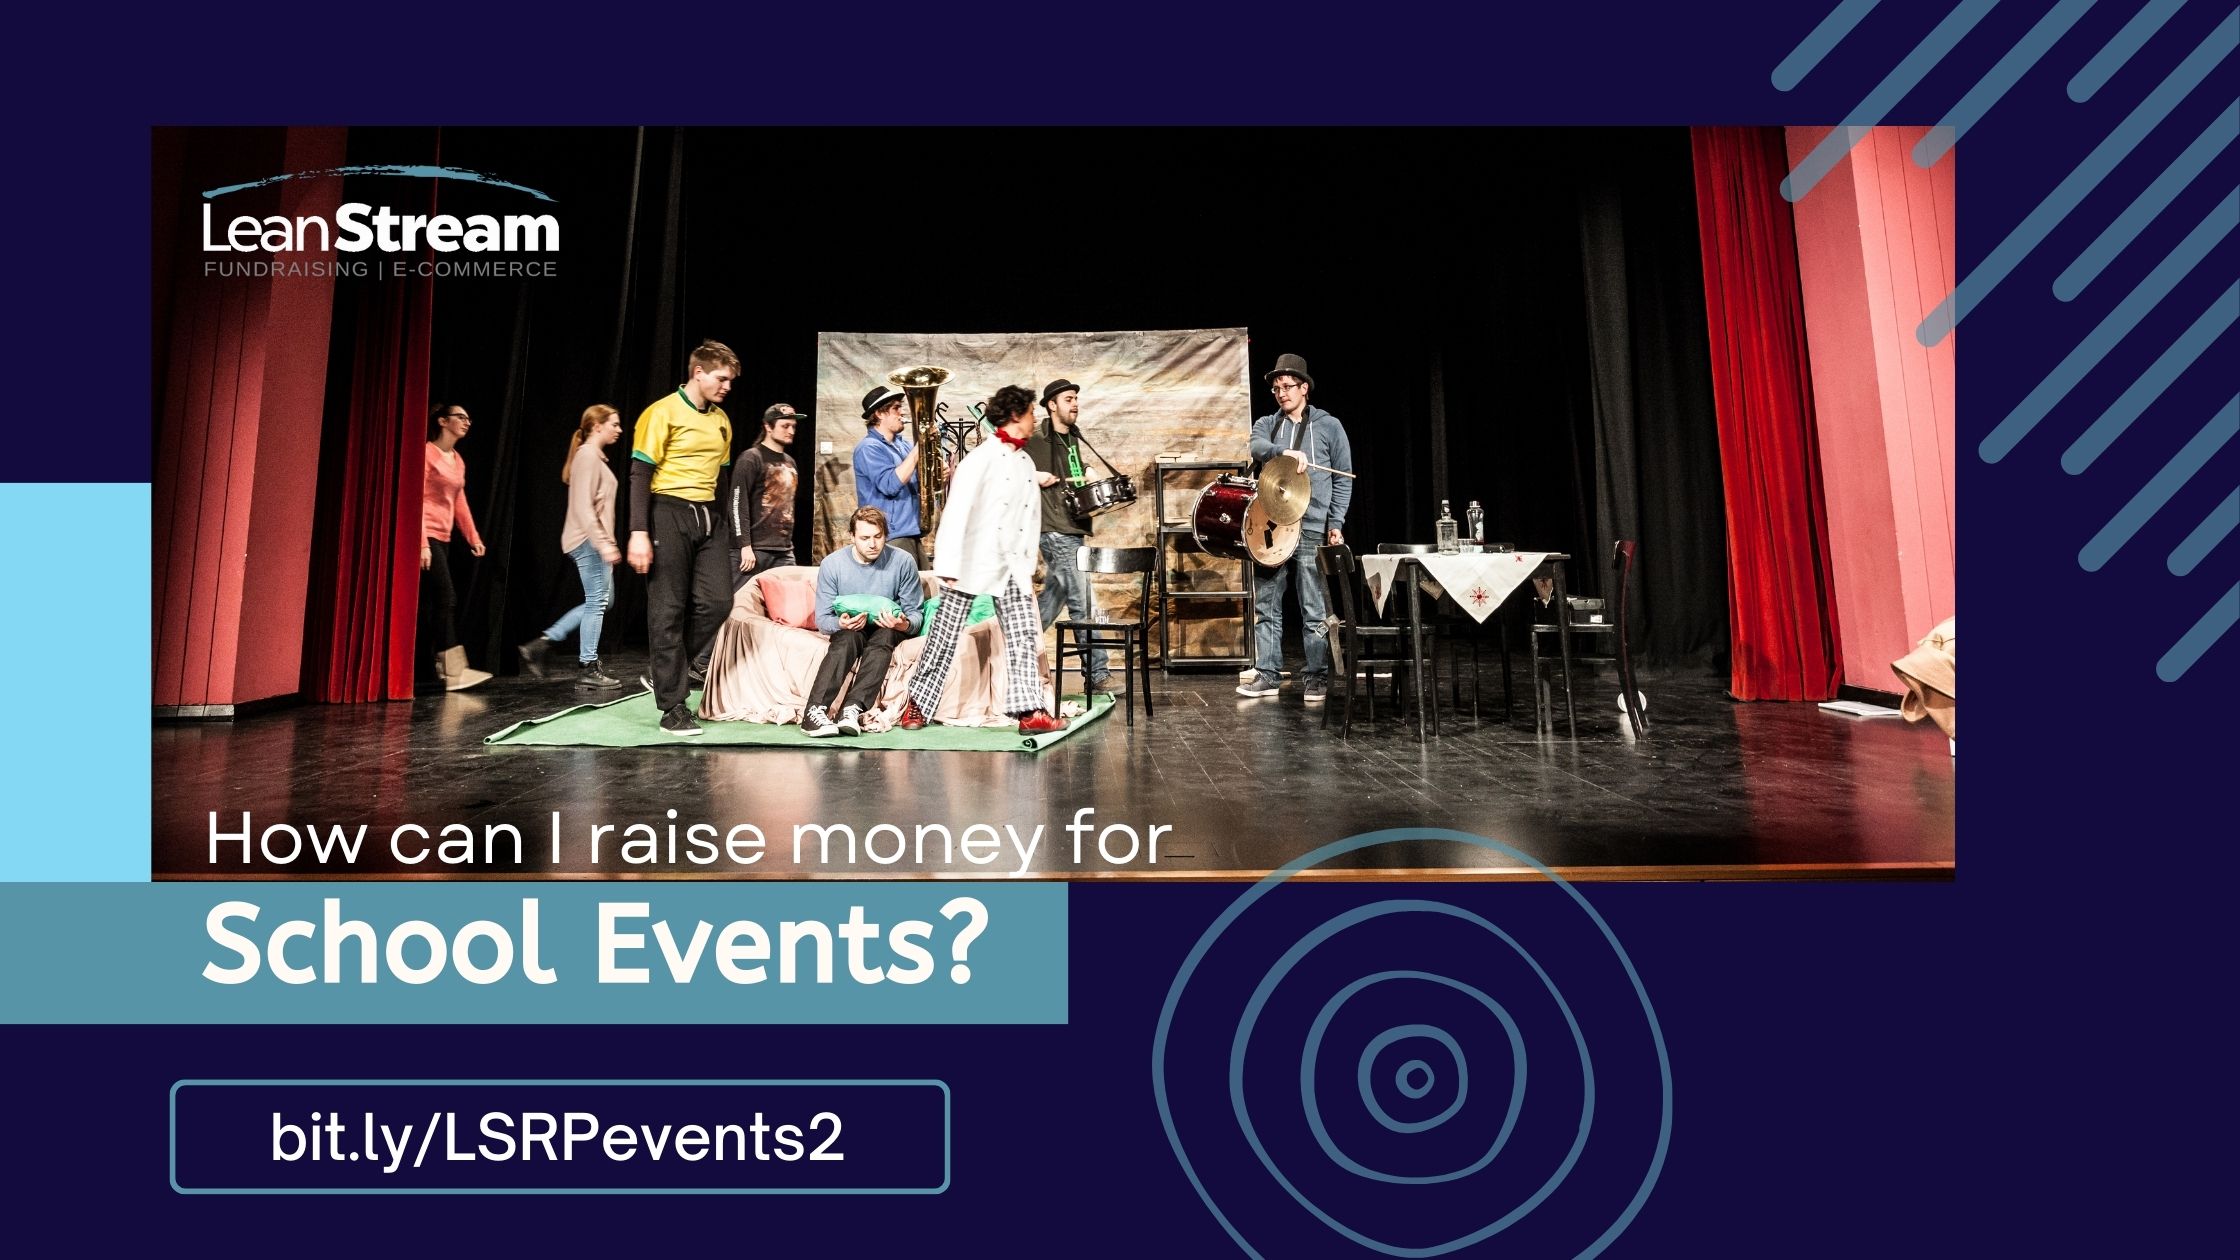 LeanStream Insights: How can I raise money for school events?